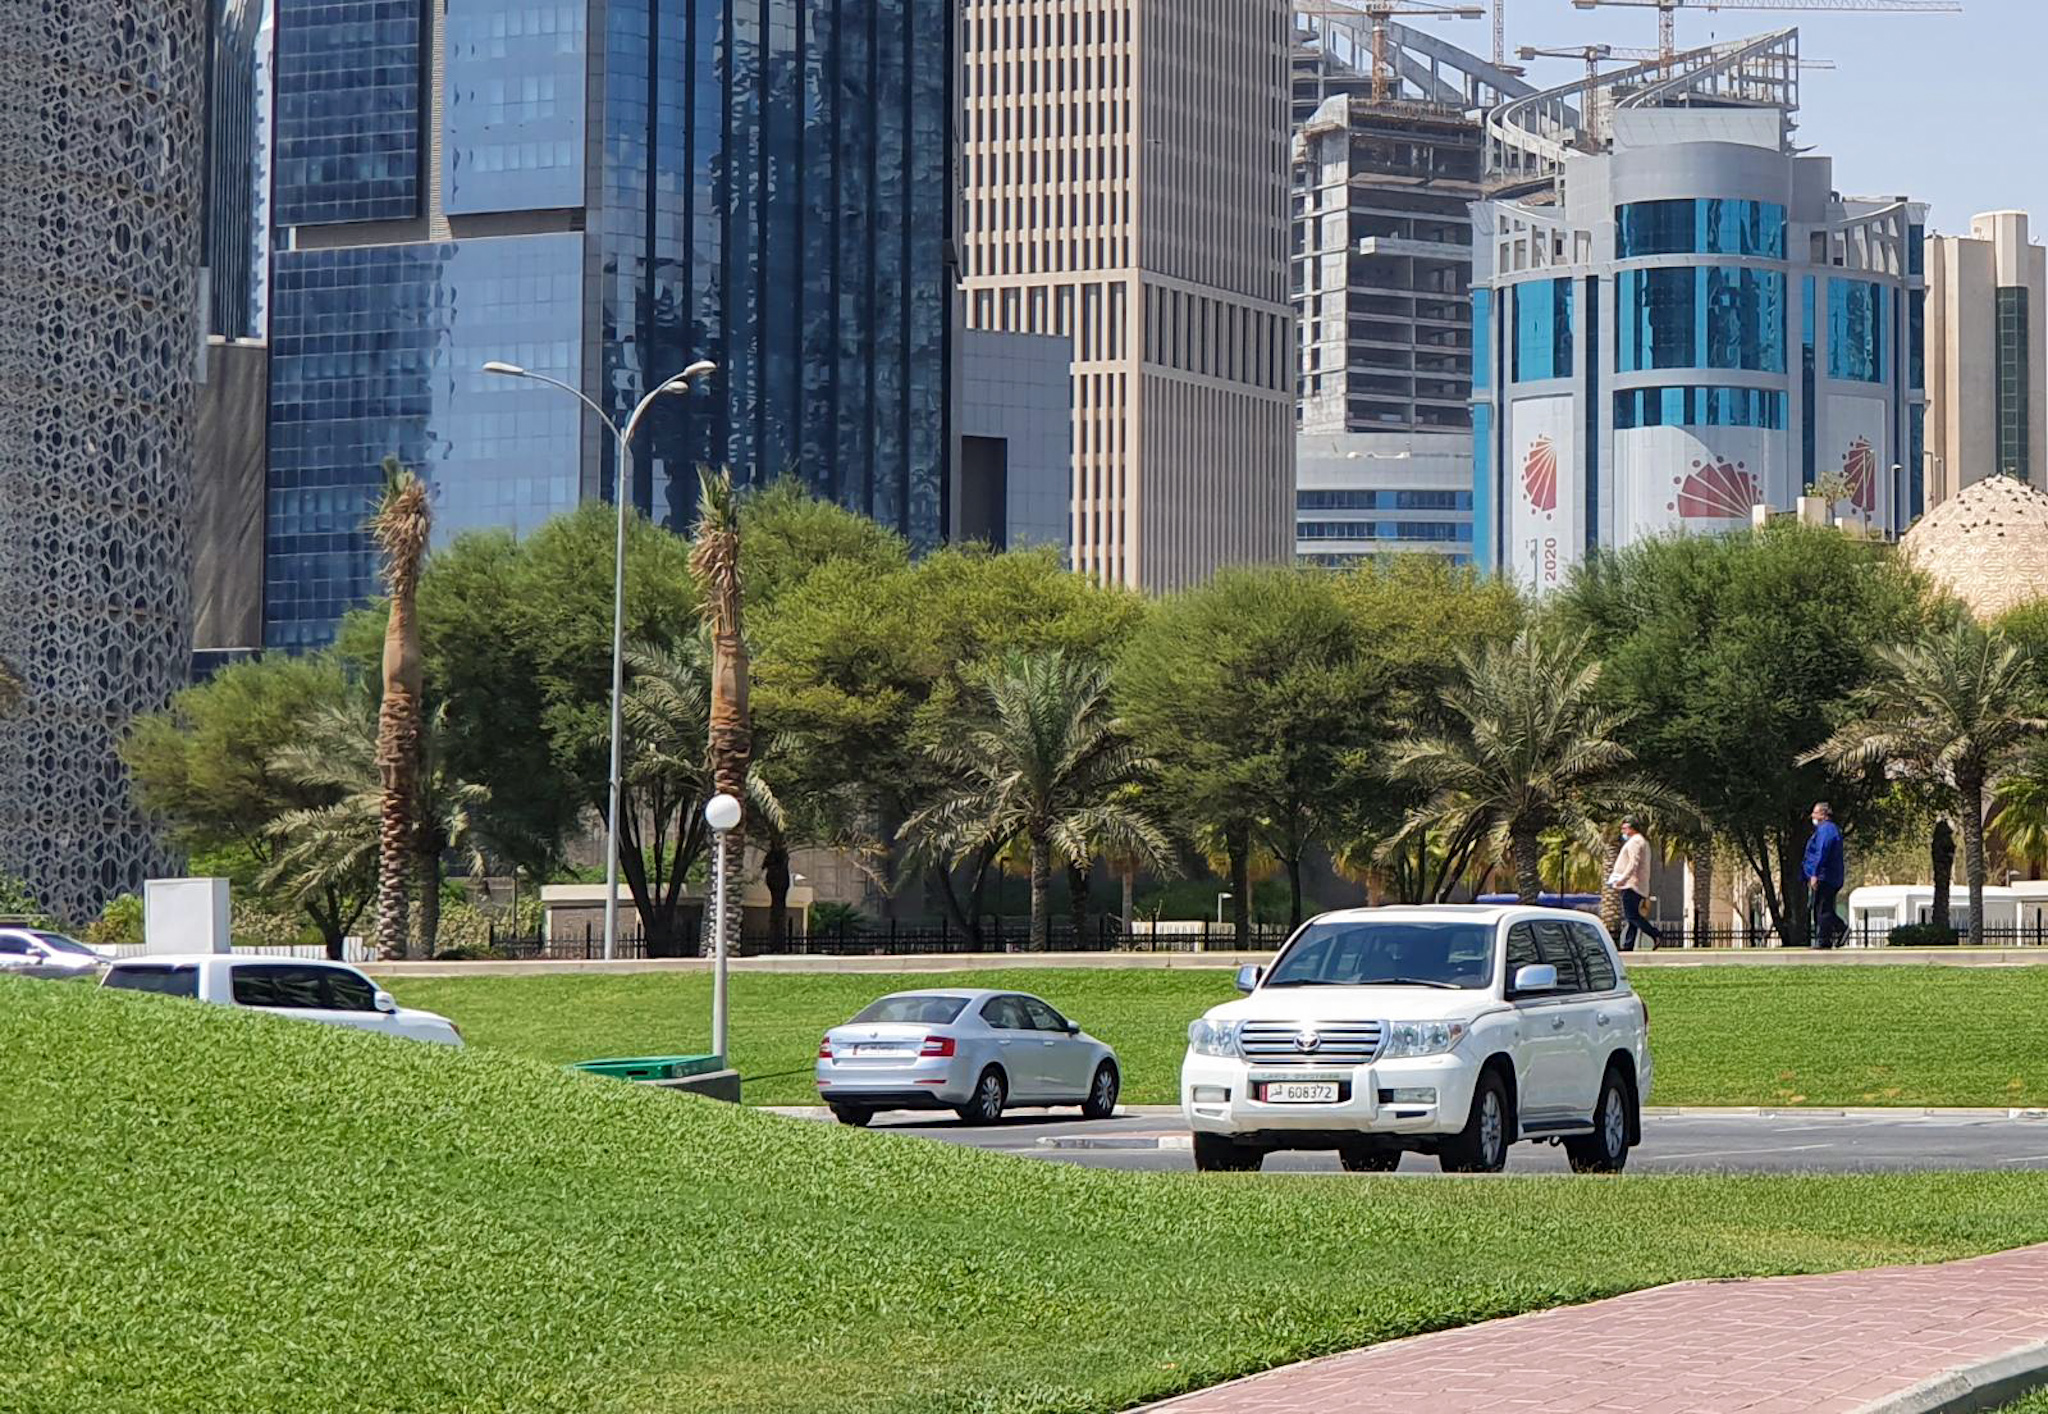 7 interesting things I discovered while driving a land cruiser in Qatar.